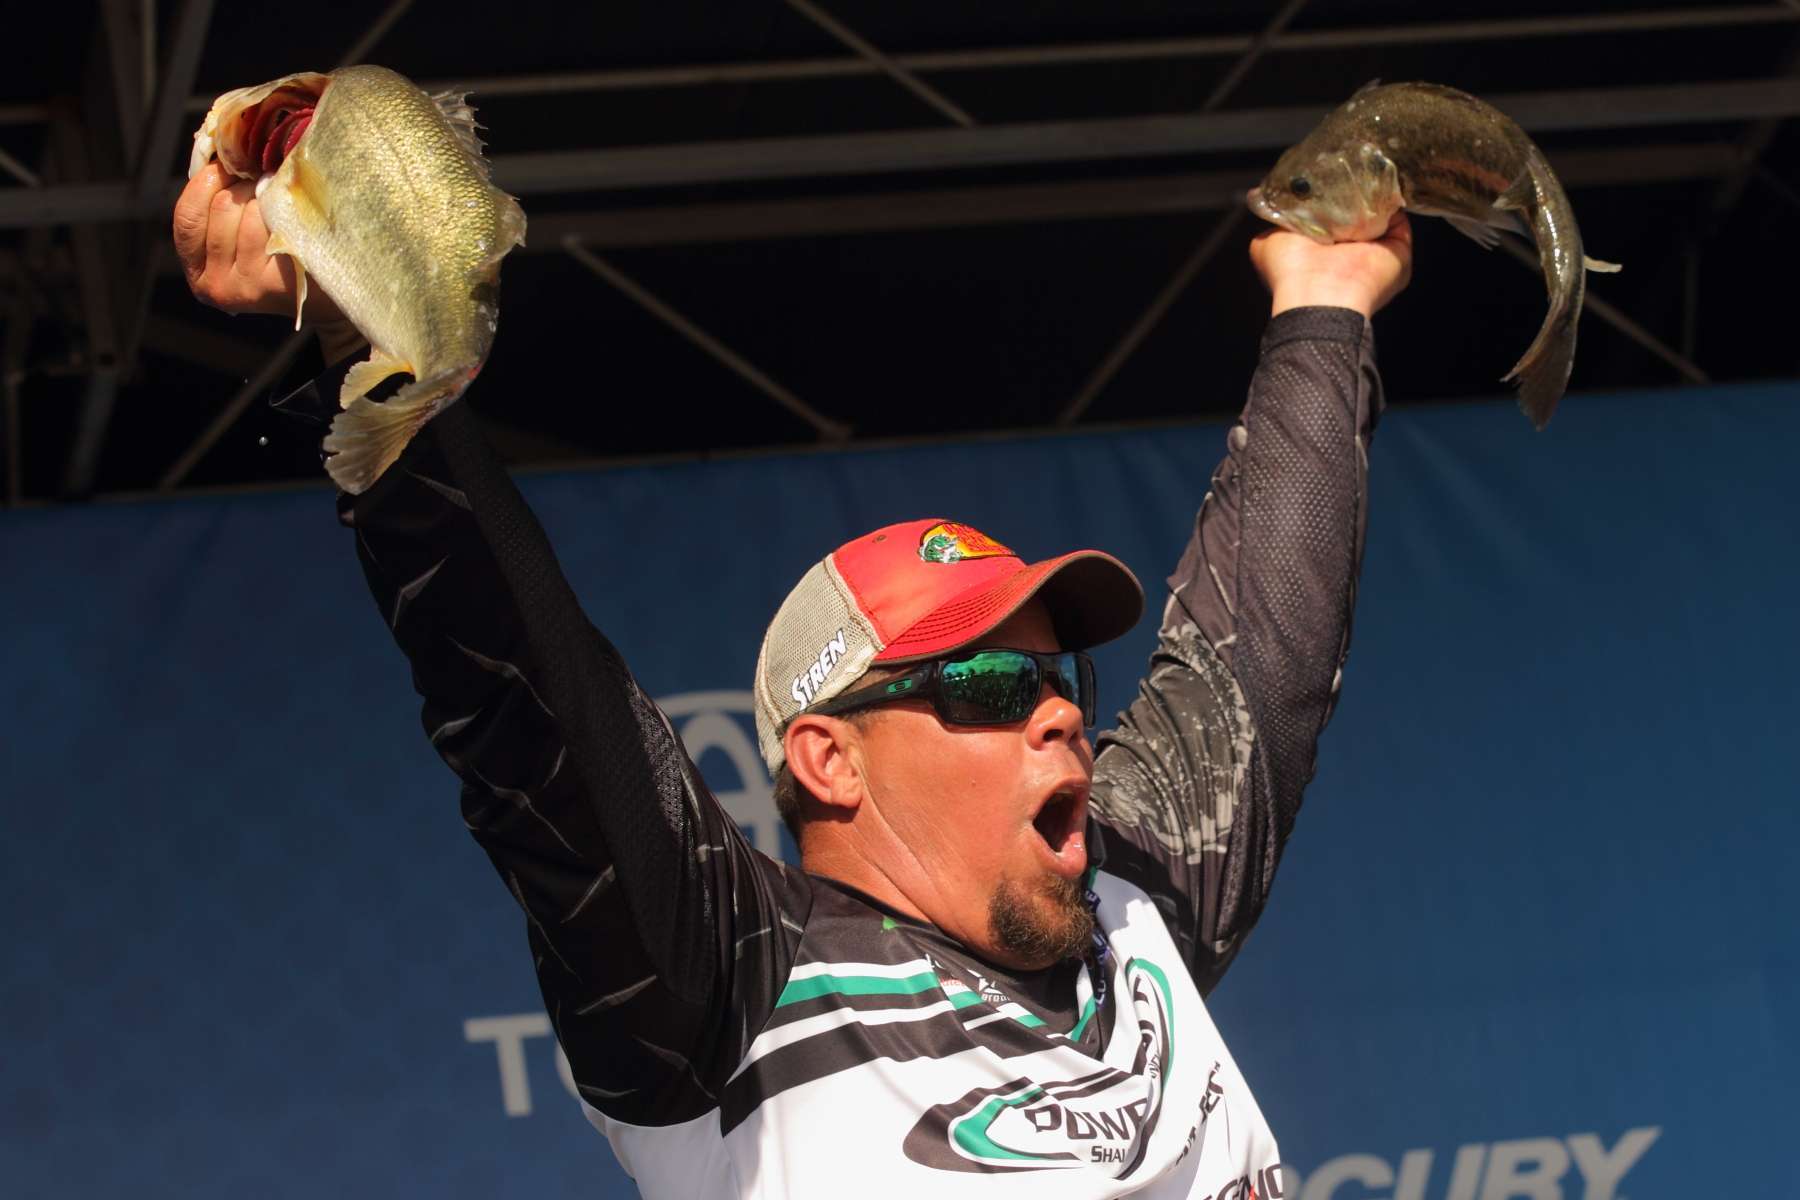 <b>Chris Lane (50-1)</b><br>
Guntersville, Ala. <br>
The first tournament I covered after going to work for B.A.S.S. was the Bassmaster Elite Series event on the Sabine River in 2015. It started out as a tough deal. Then it started raining sideways. But Chris Lane just kept adjusting and readjusting to get the win. Weâve talked about what might happen if two distinct patterns emerge in this event. Weâve mentioned what might happened if pieces of patterns present themselves. If neither happens and itâs extremely tough, we should talk about the chances of Lane hoisting the Classic trophy for the second time.
